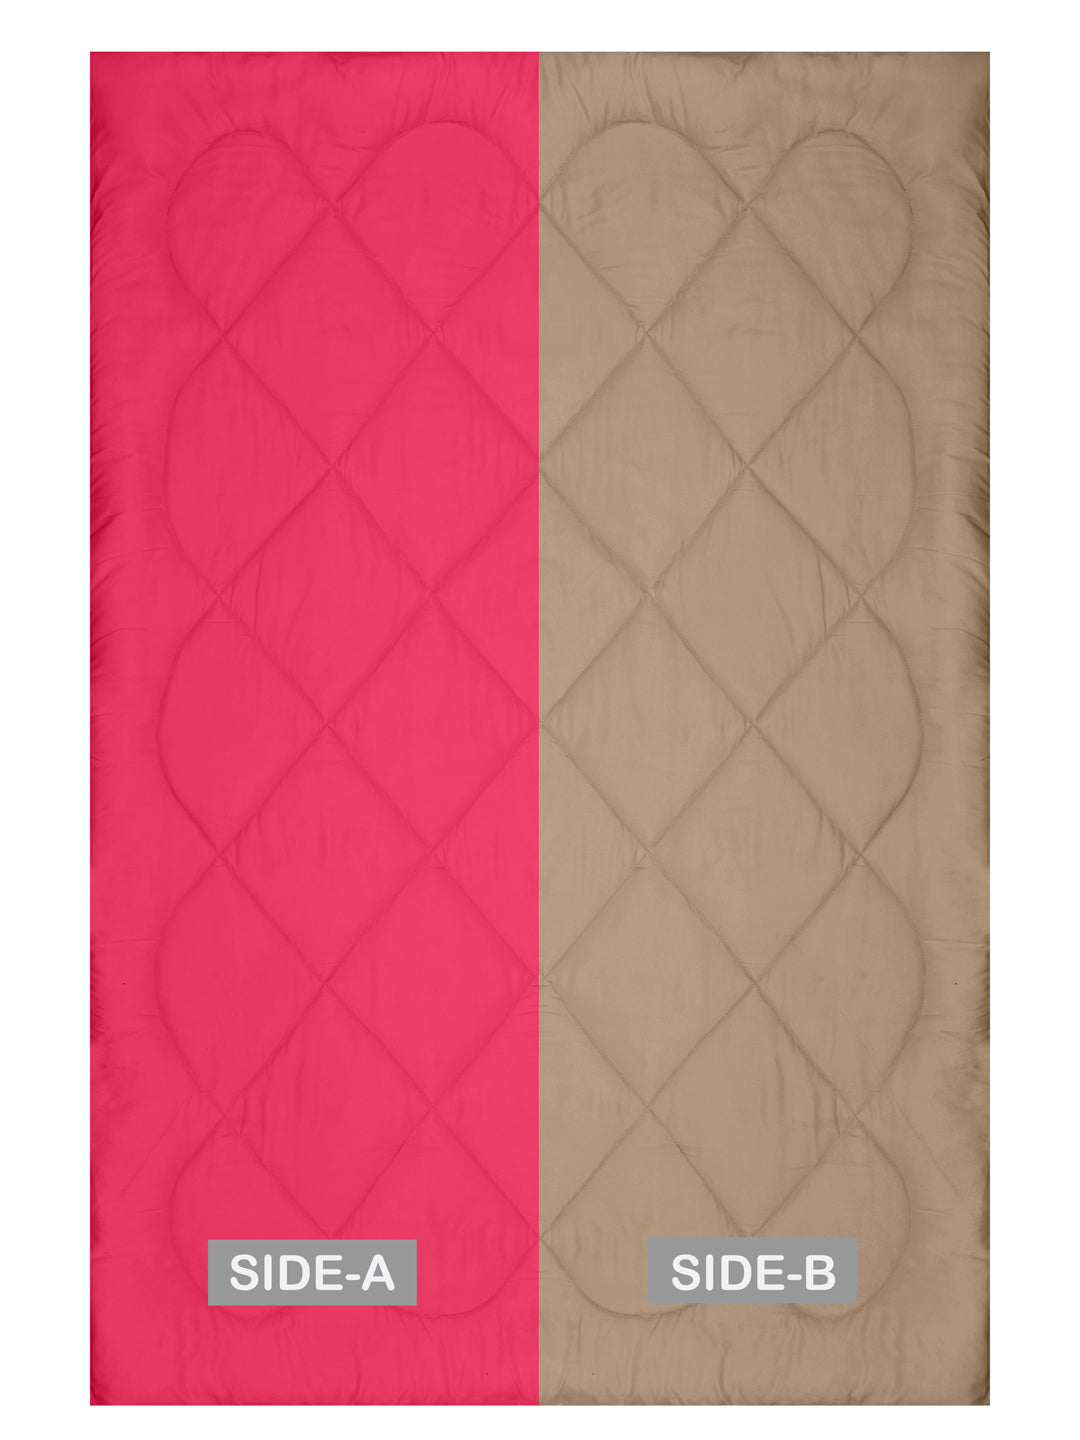 Reversible Single Bed Comforter 200 GSM 60x90 Inches (Pink & Taupe)